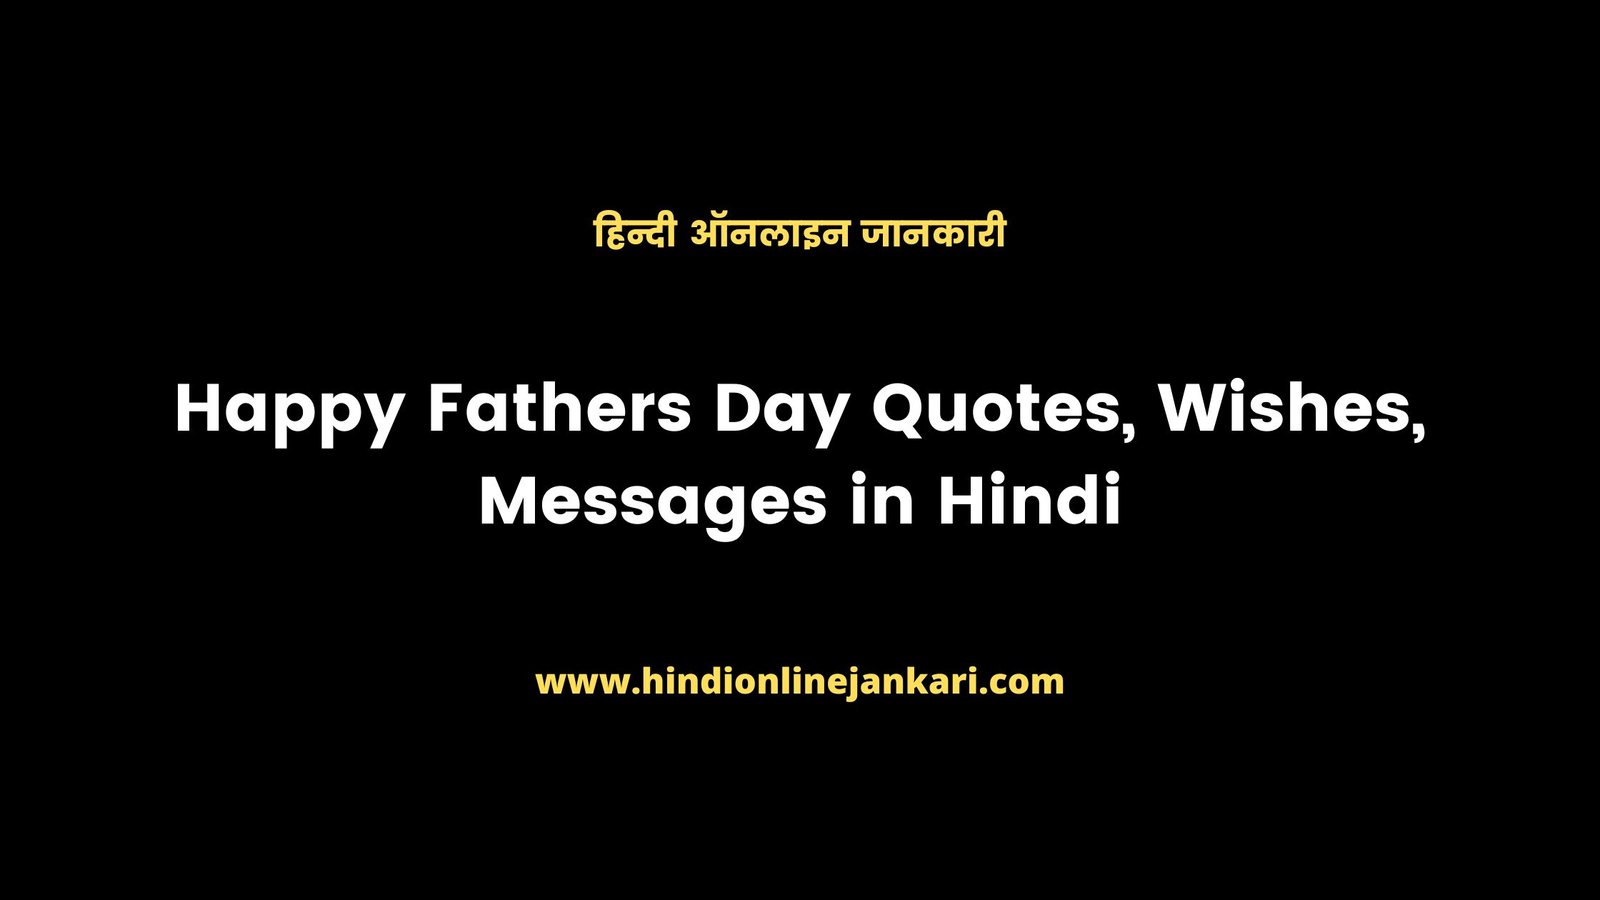 फादर्स डे कोट्स 2023, Happy Fathers Day Quotes, Wishes, Messages in Hindi 2023, Father's Day Quotes In Hindi, Father’s Day 2023 Quotes In Hindi